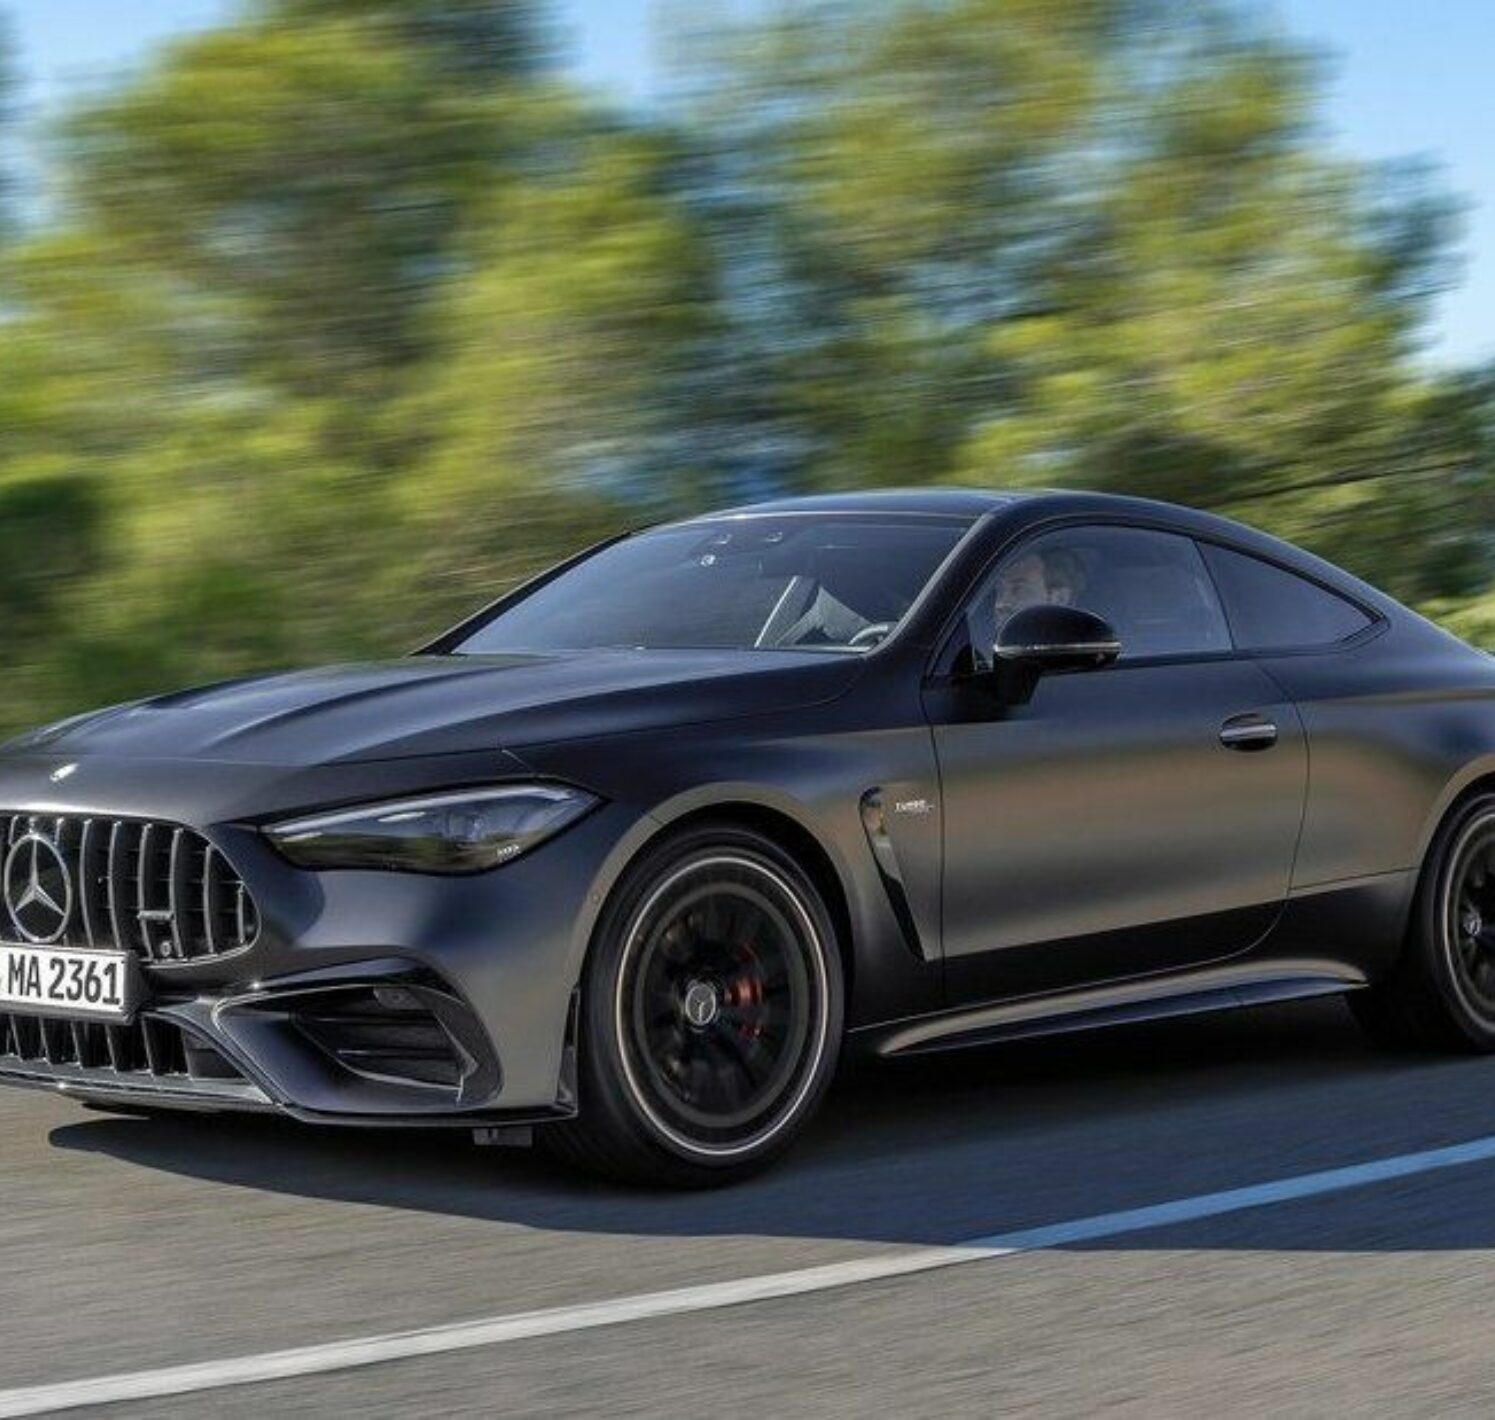 https://autofilter.sk/assets/images/cle-kupe/gallery/mercedes-benz-cle-53-amg-coupe-2024_15-galeria.jpg - obrazok